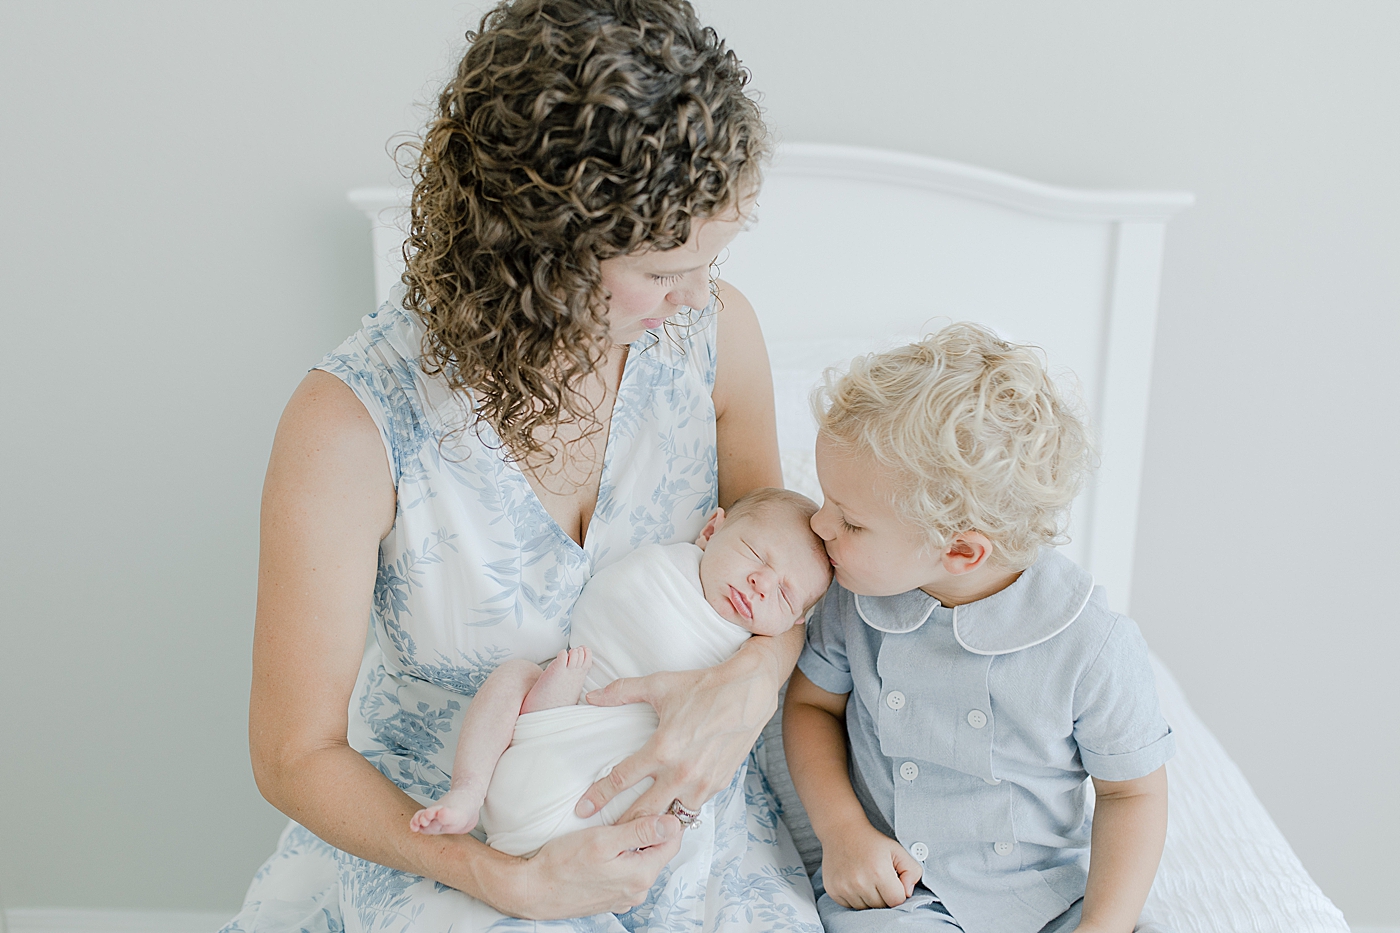 Mom sitting with toddler boy kissing newborn baby's head | Photo by Little Sunshine Photography